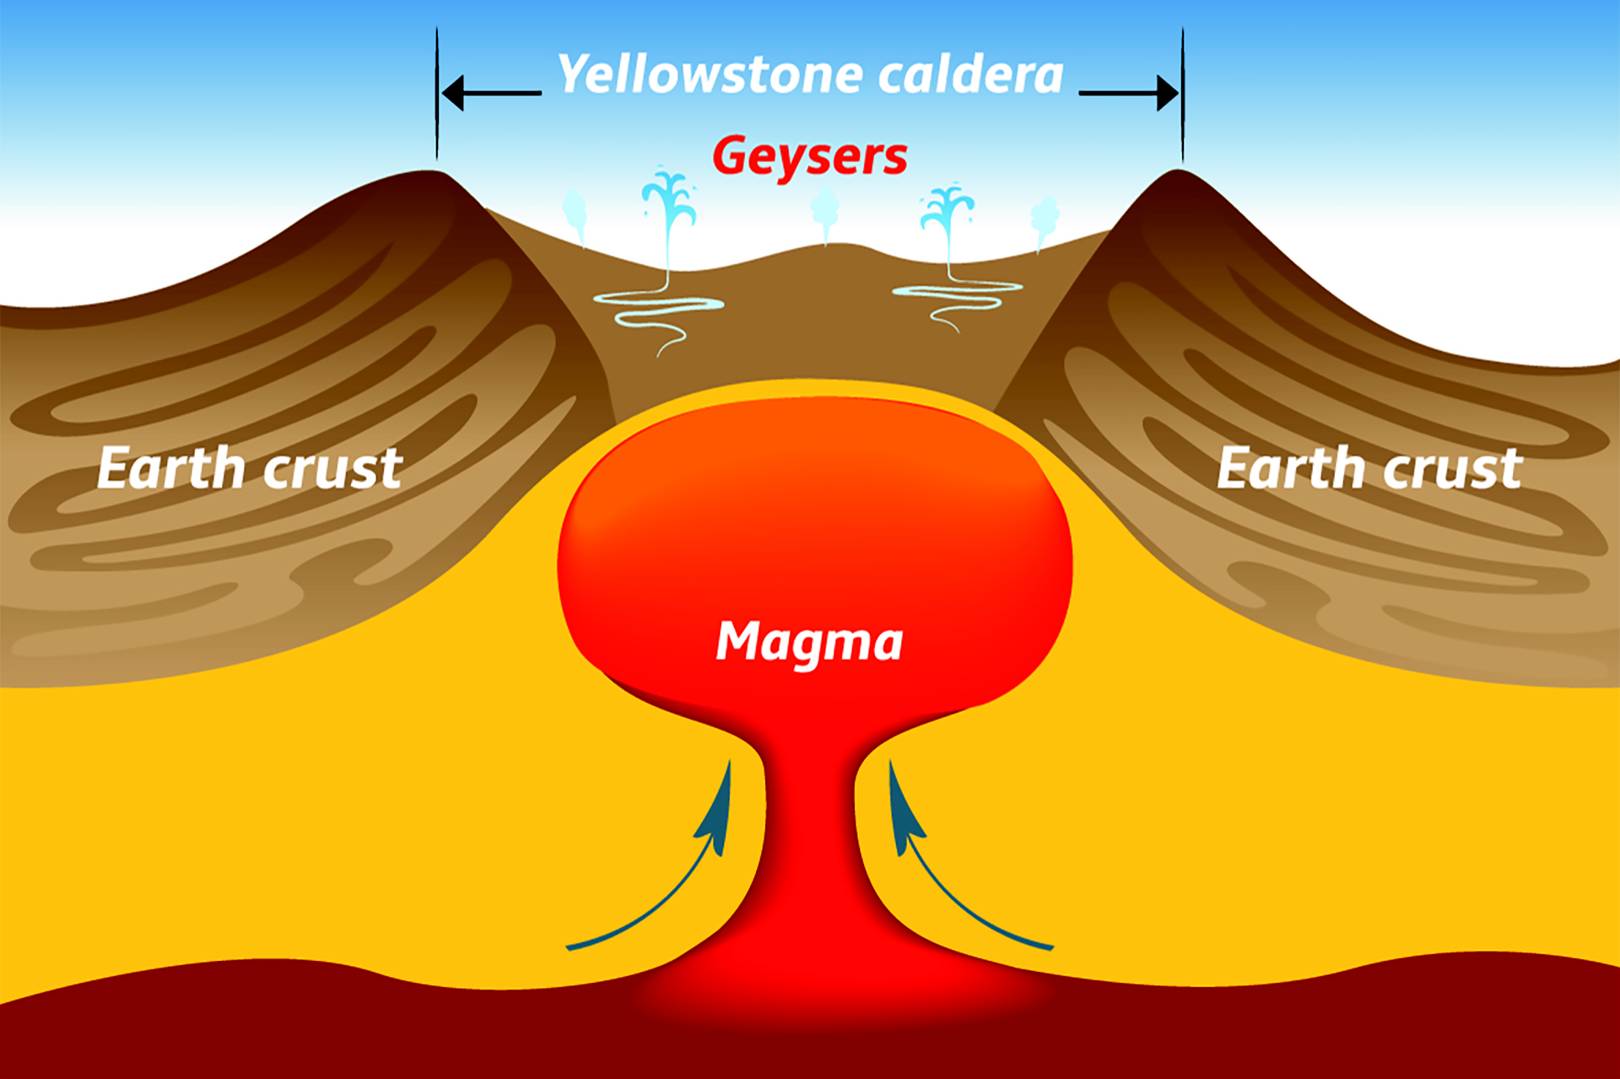 We really need a good plan for when a supervolcano erupts.